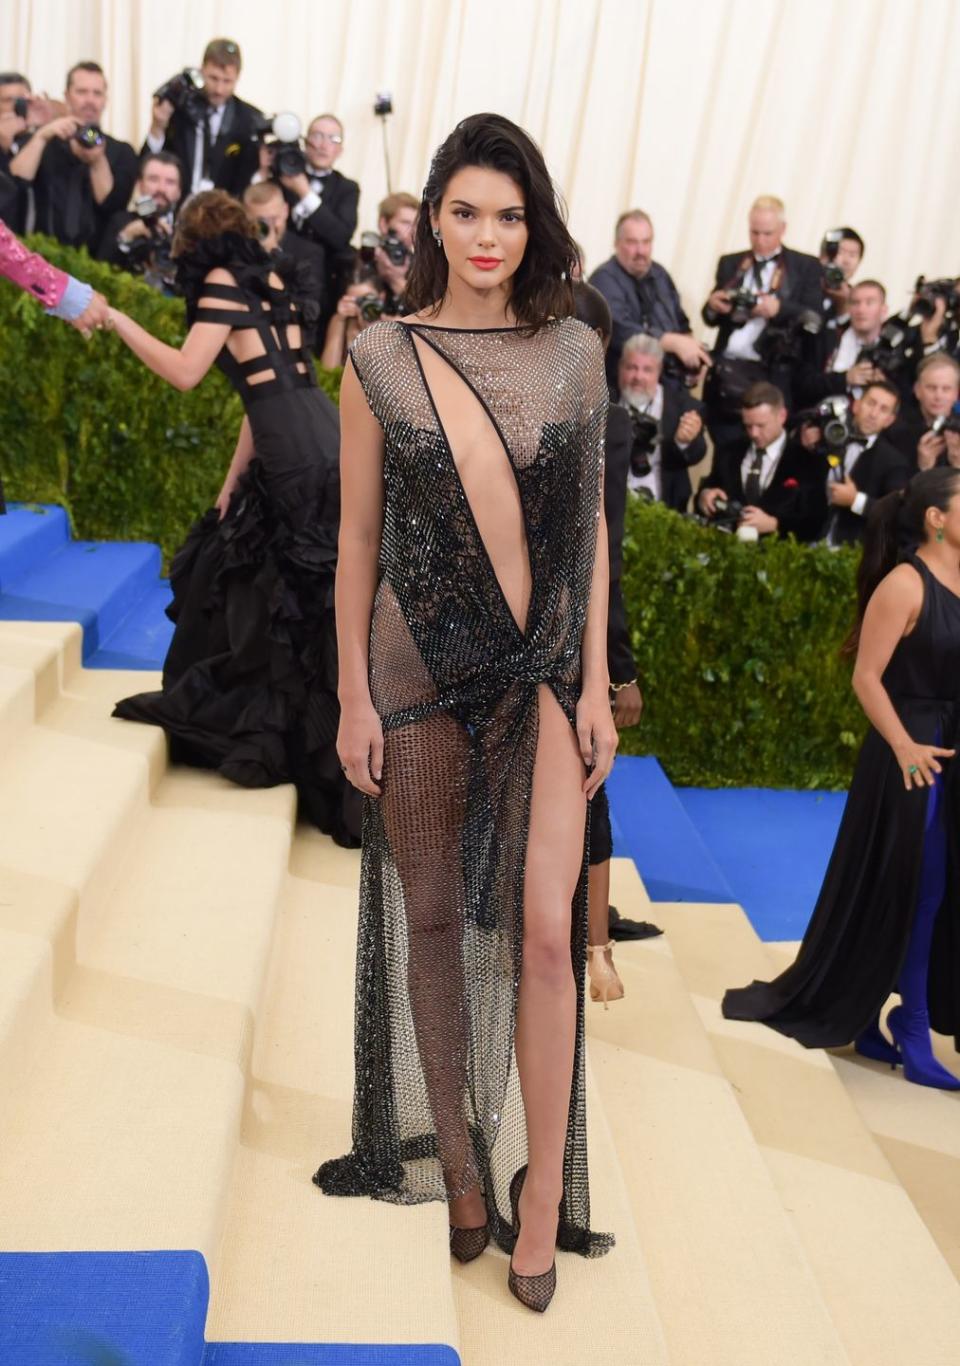 Kendall Jenner at the Met Gala in 2017